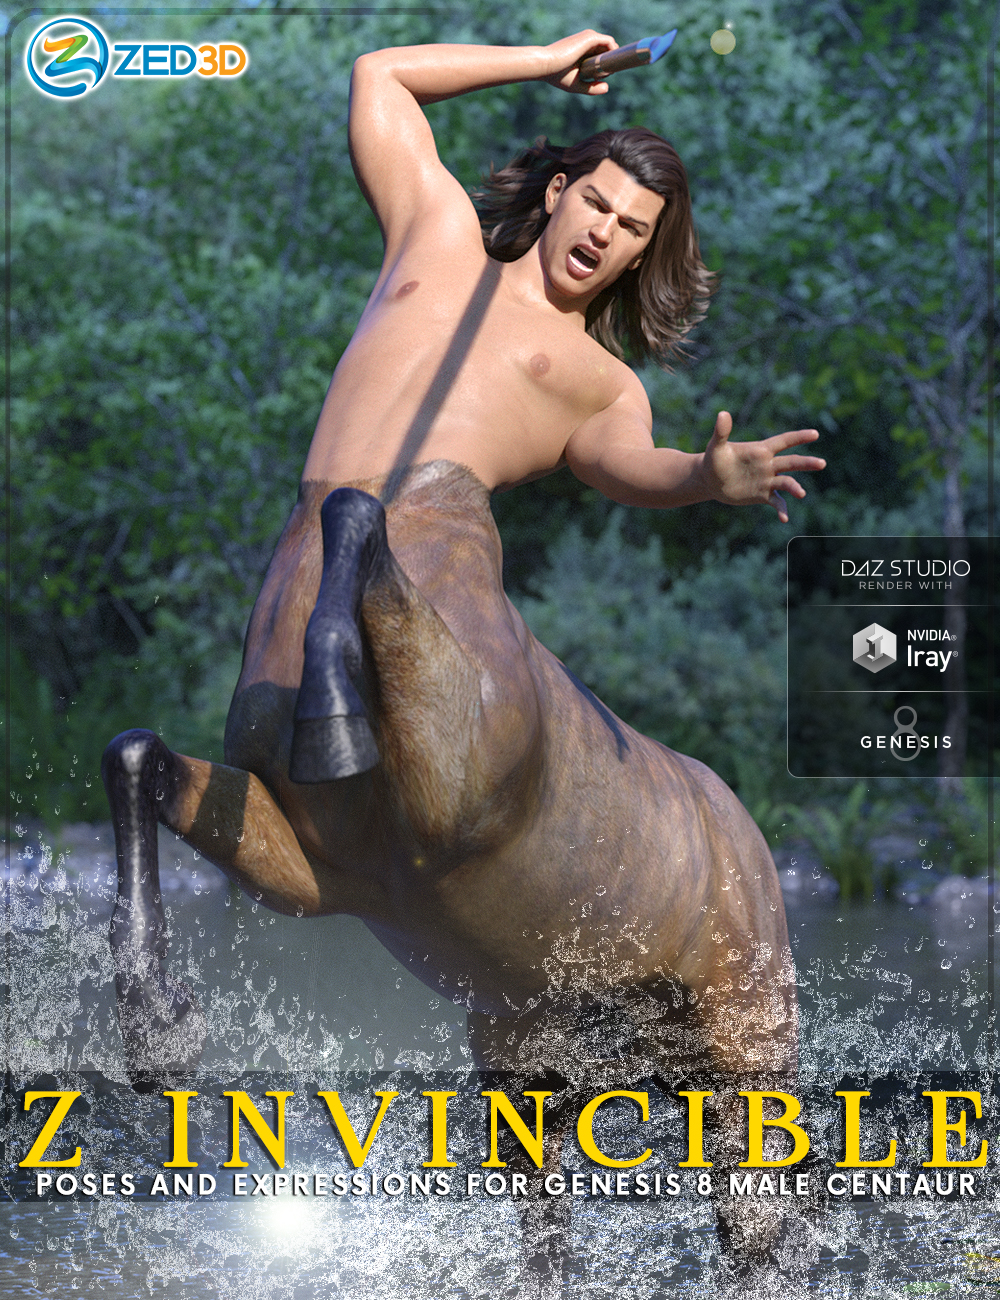 Z Invincible Poses and Expressions for Genesis 8 Male Centaur